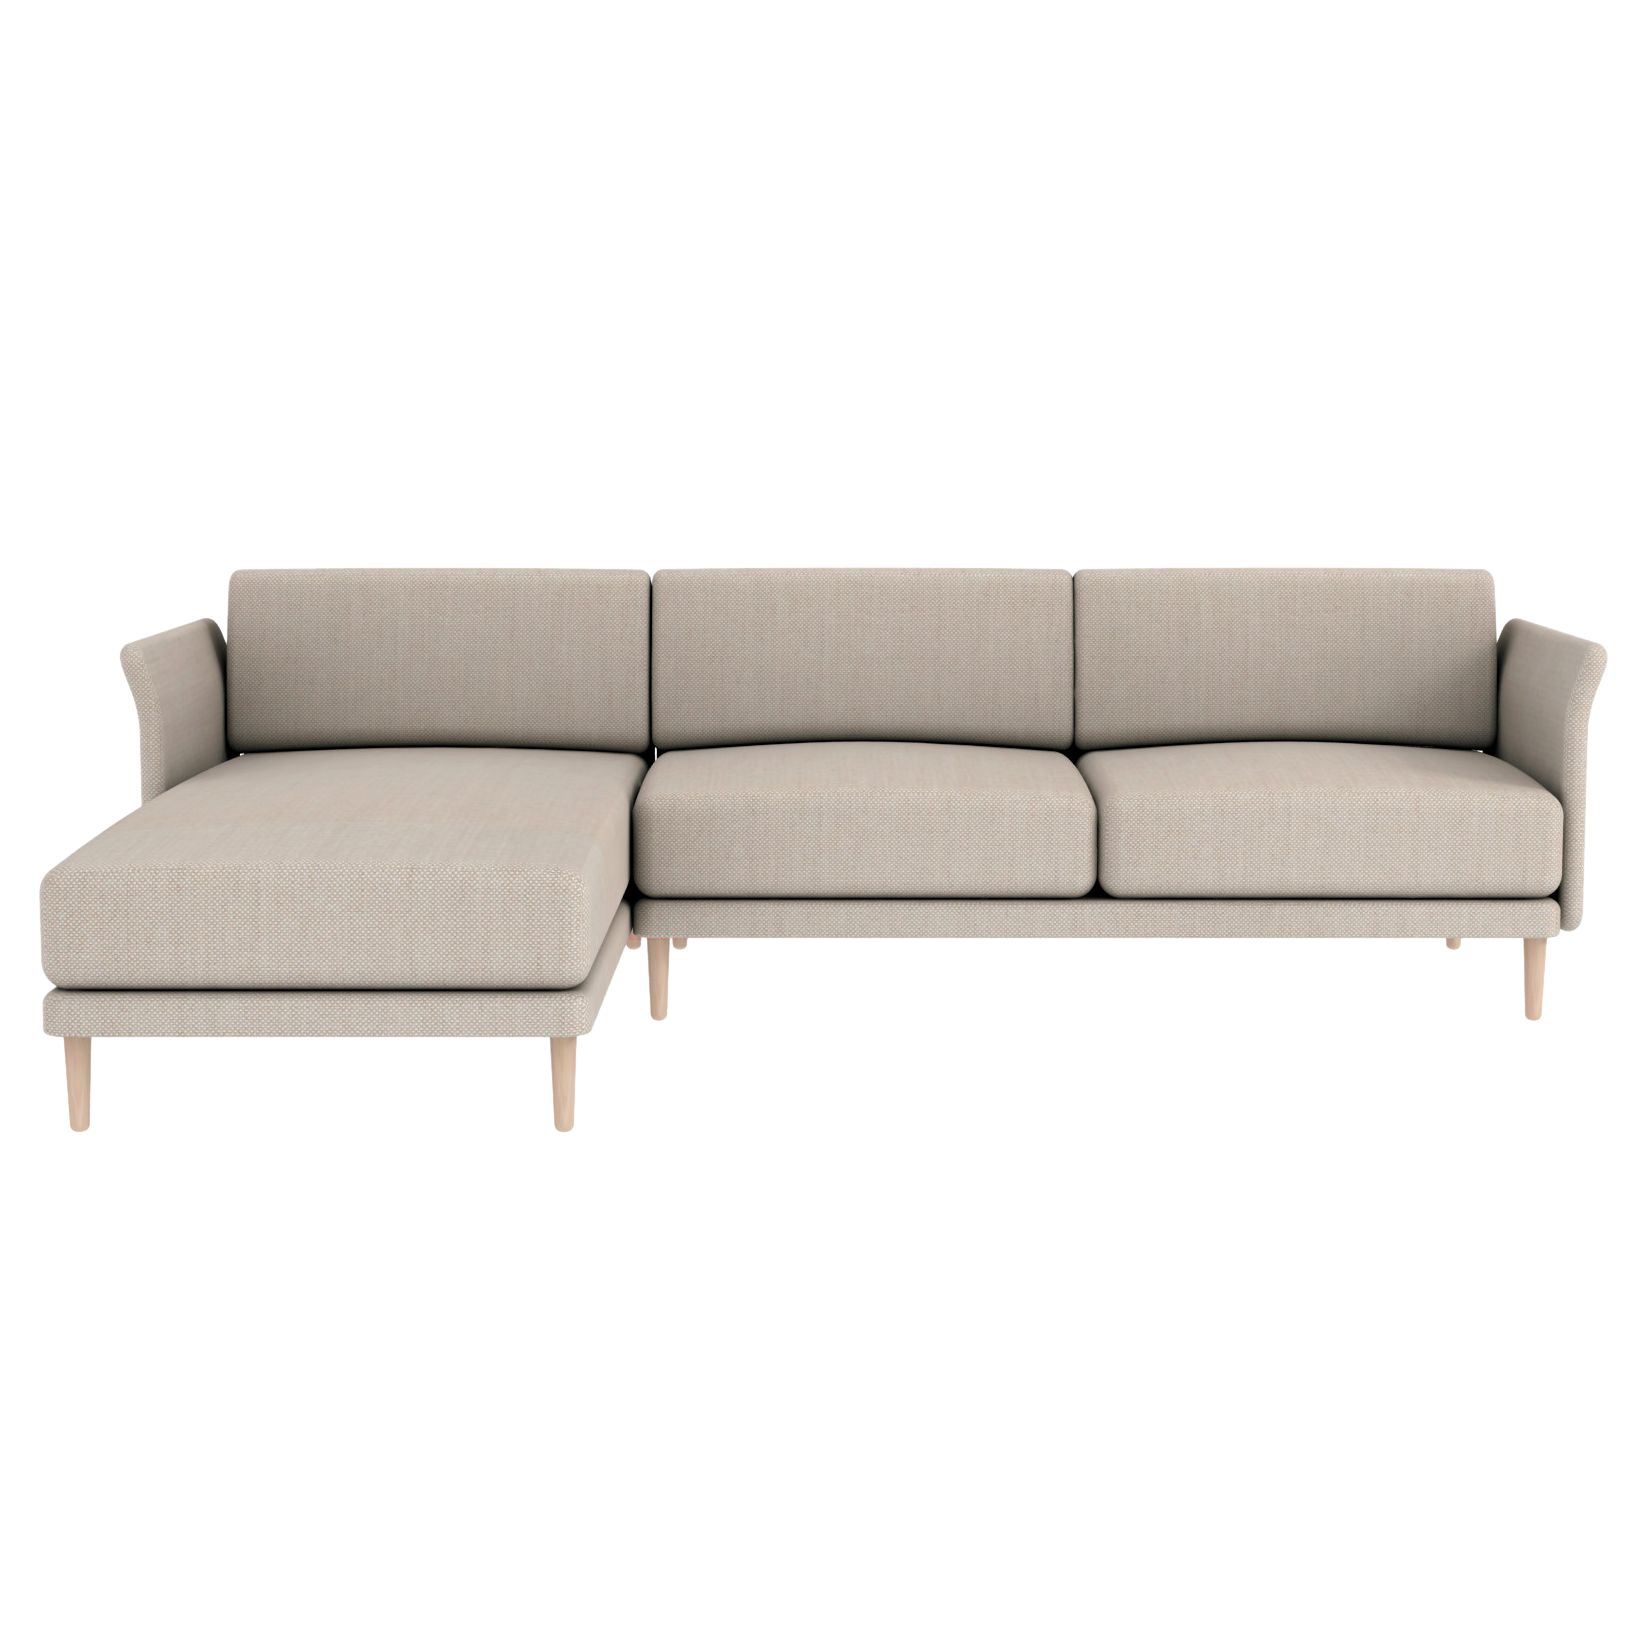 Matthew Hilton for Case Theo 2 Seat Sofa and Chaise, Pepper at John Lewis